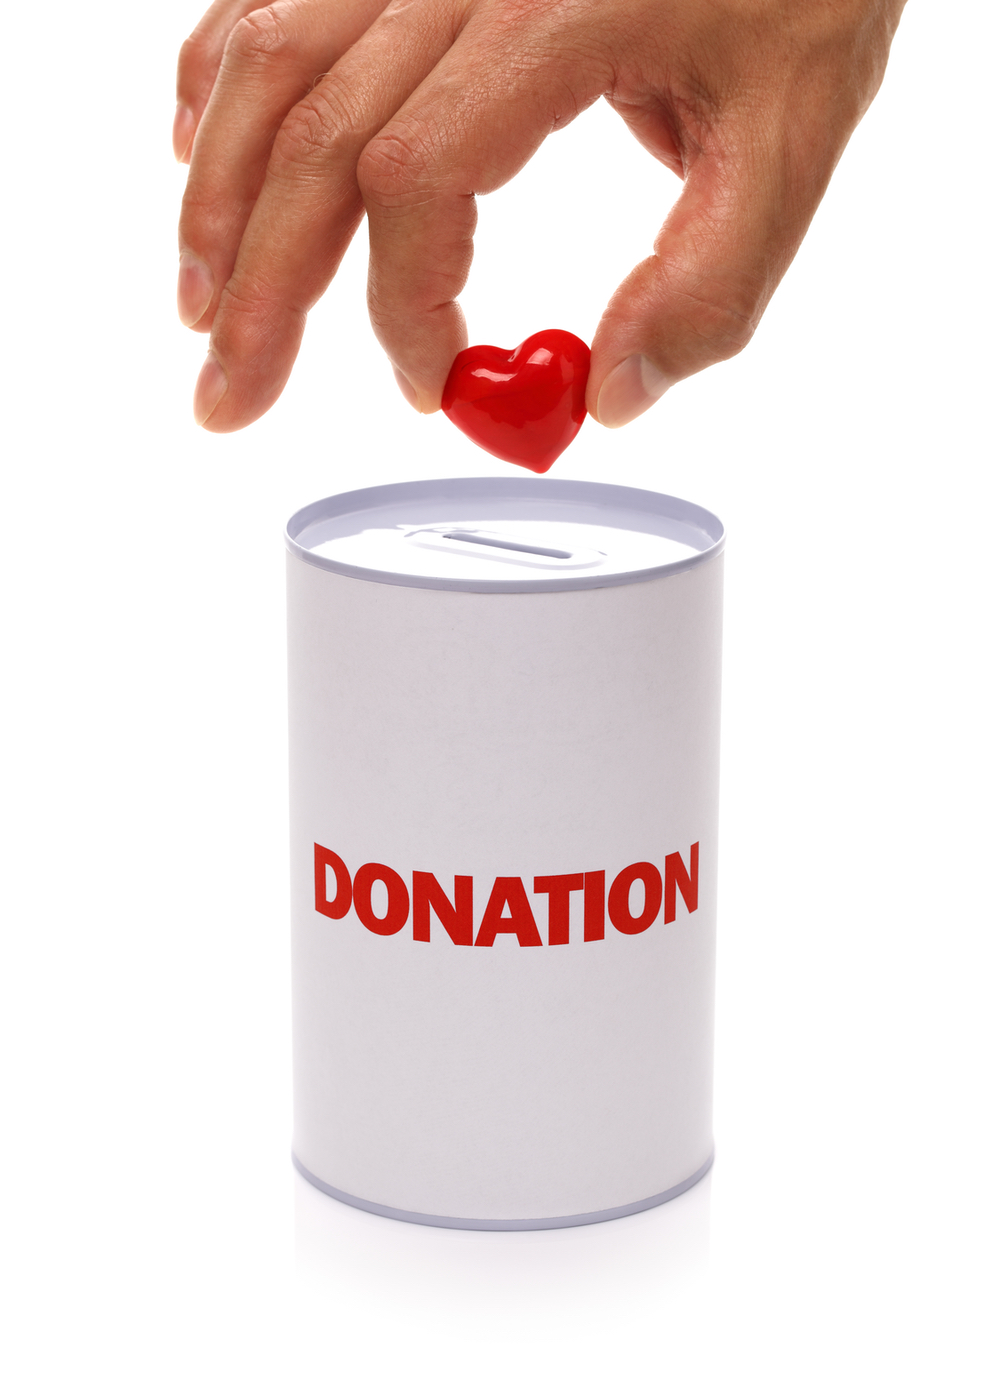 donation box with heart concept for charity or organ donation